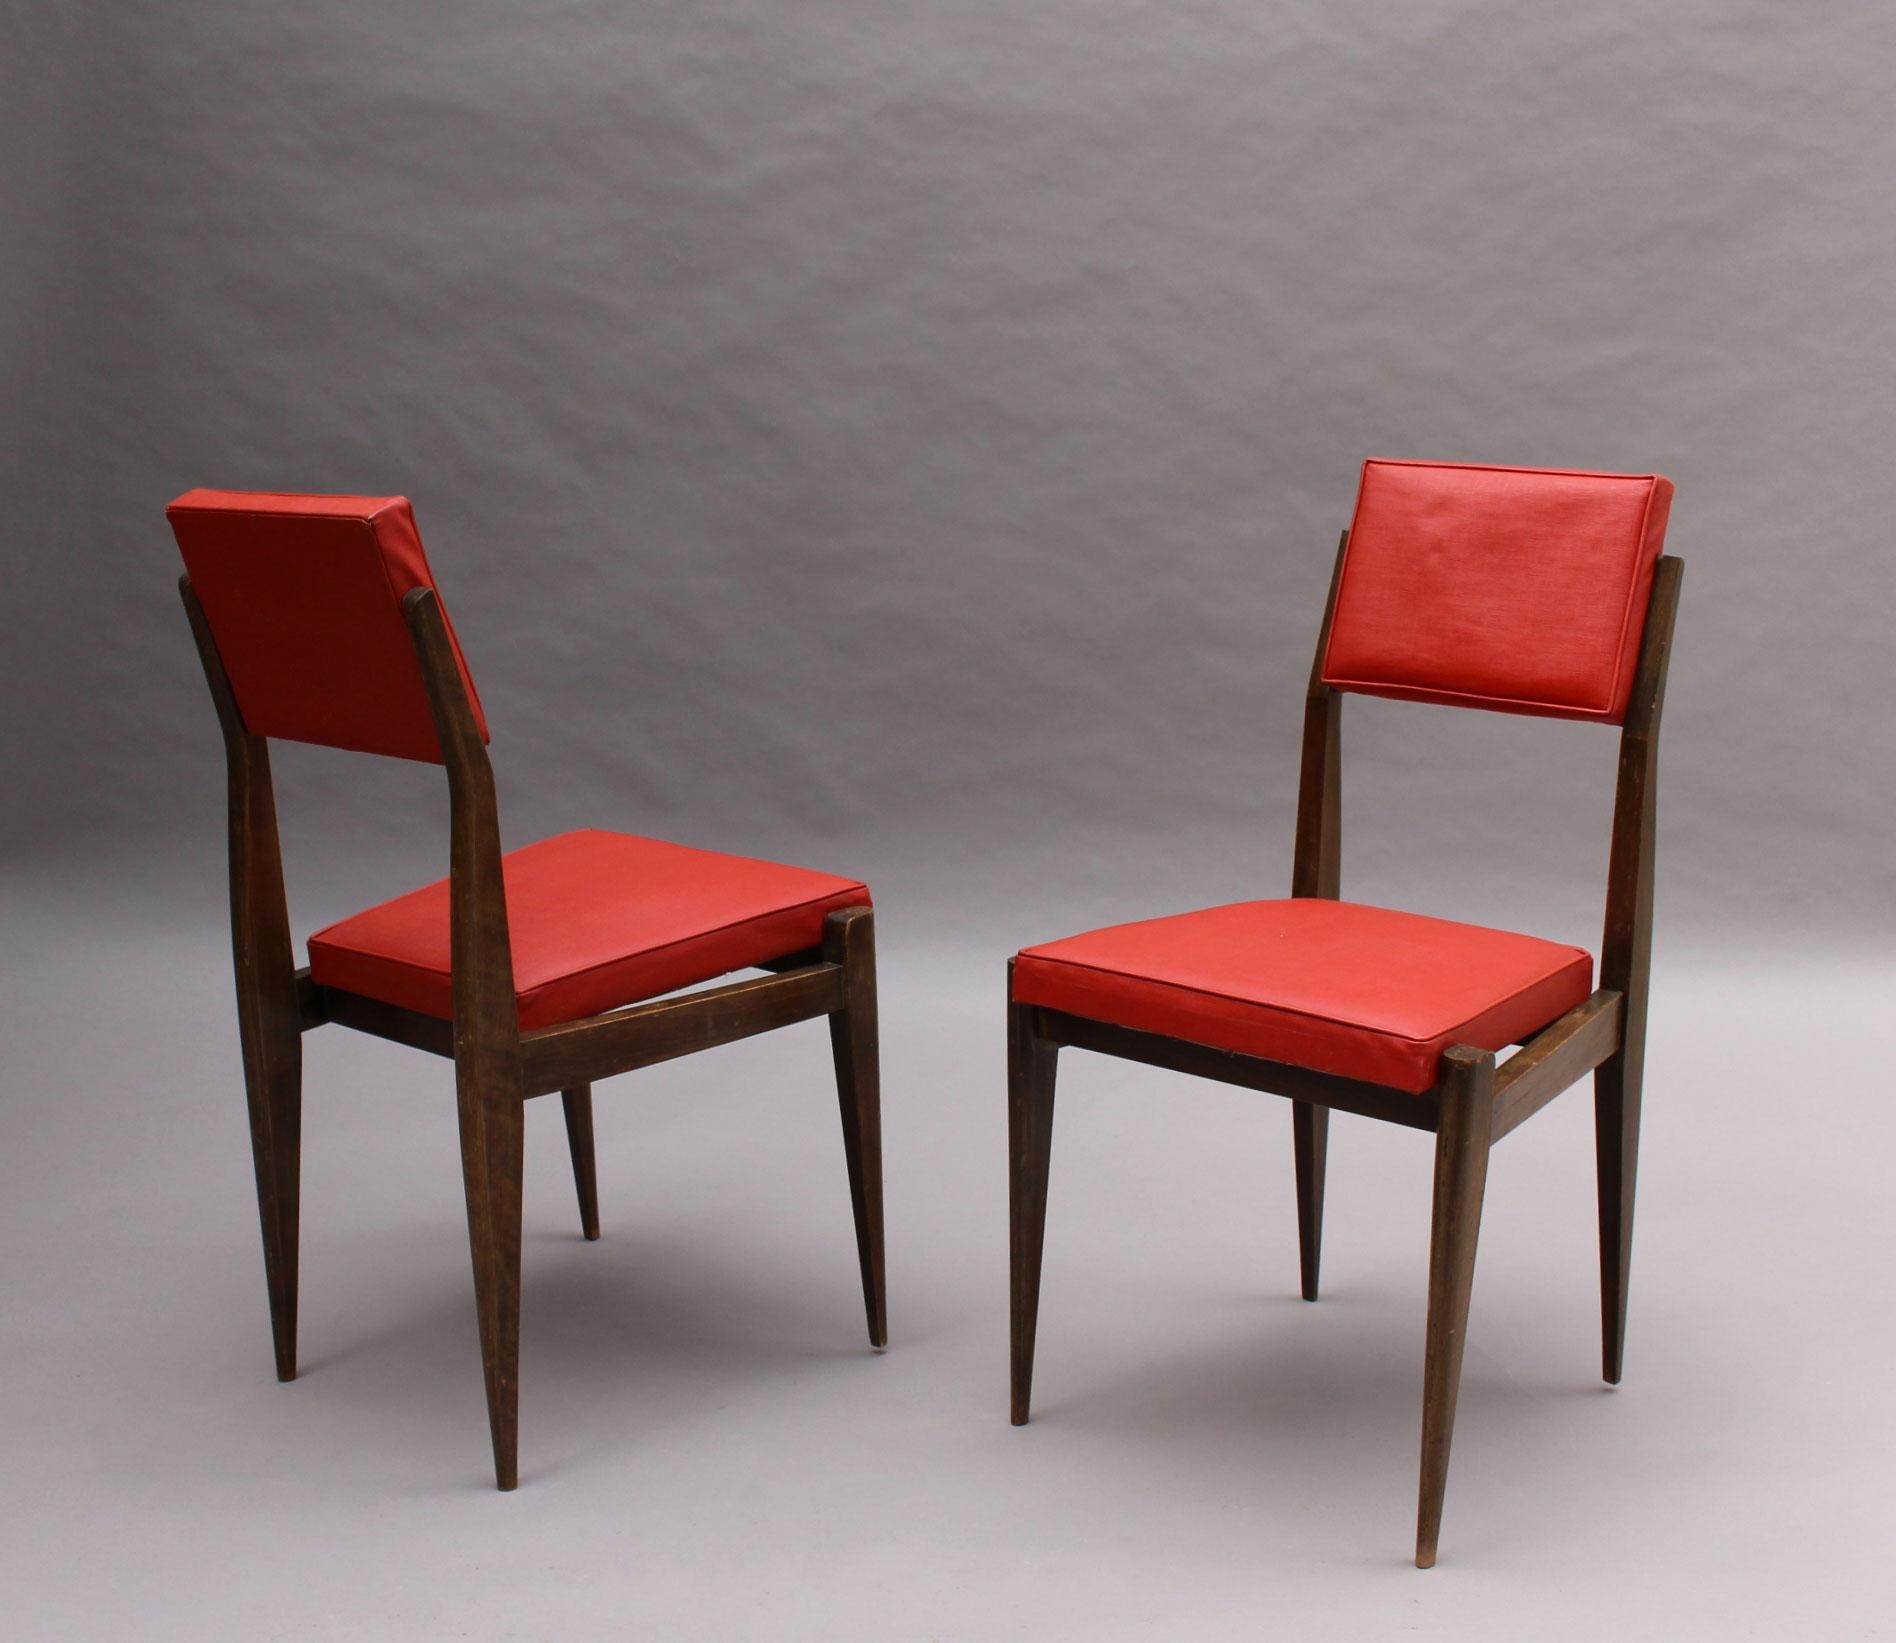 A pair of French mid-century stained beech chairs with original red vinyl upholstery.